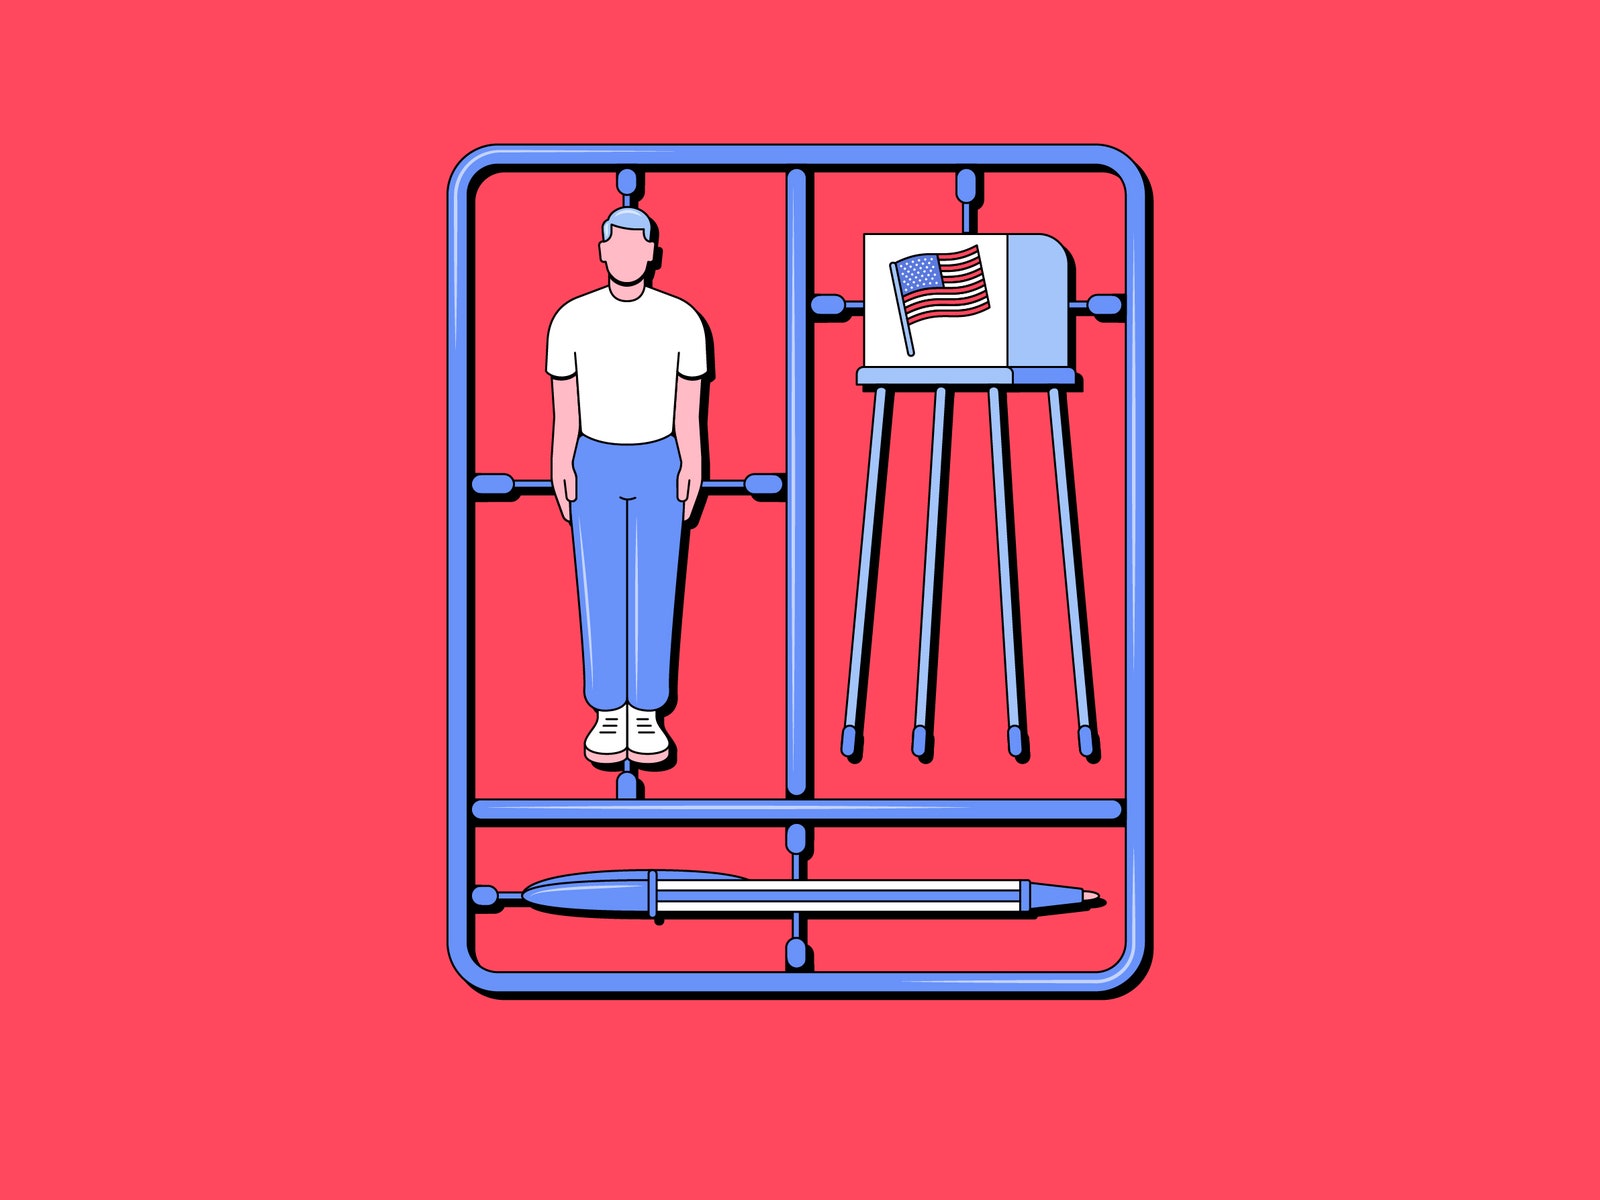 Illustration of a voter and voting booth cutout.